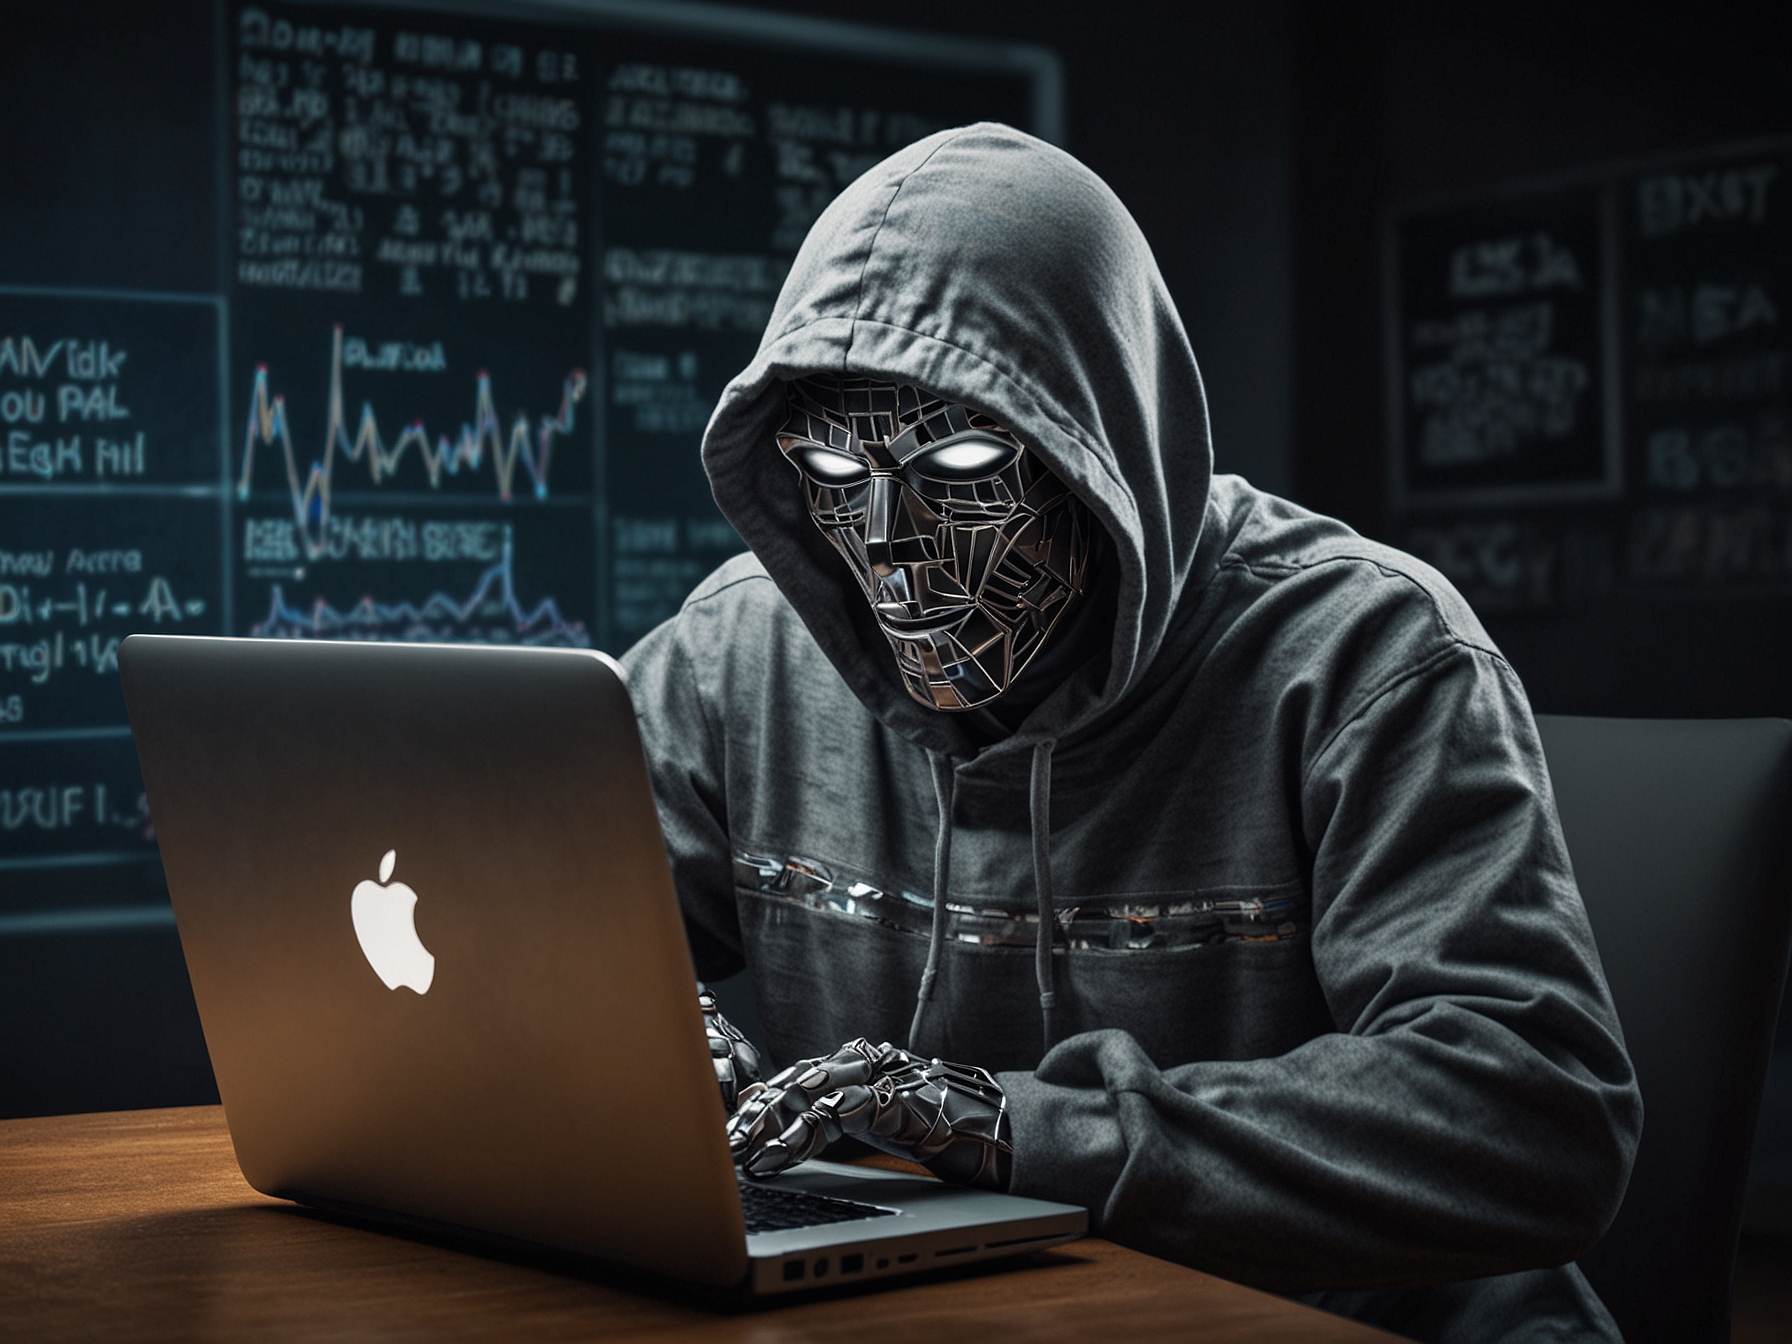 An illustration showing a Mac user unknowingly downloading malware through a deceptive Google ad, designed to represent the tactic used by cybercriminals.